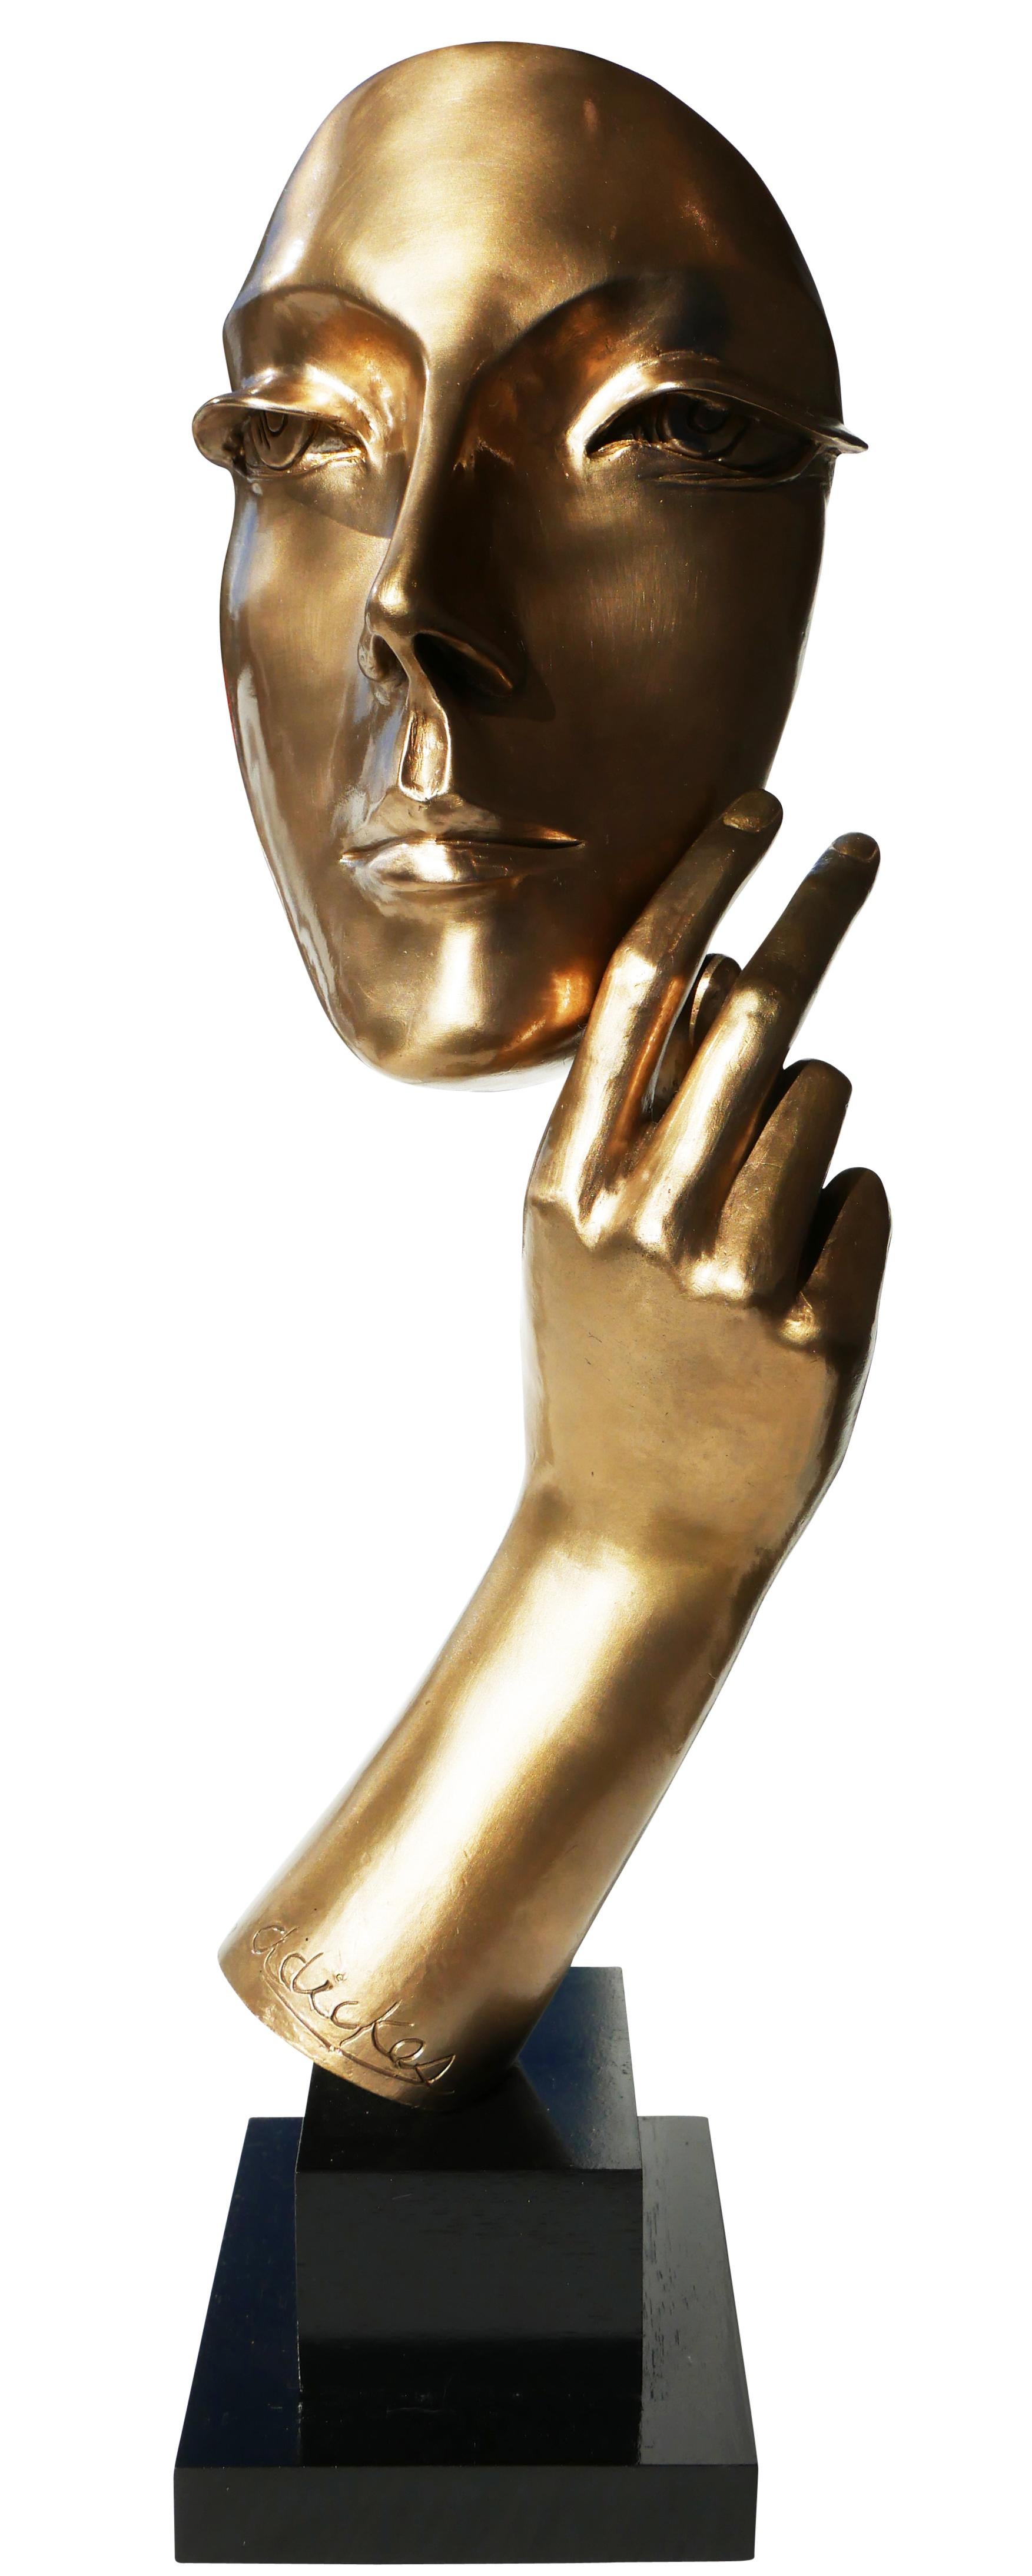 David Adickes Abstract Sculpture - Abstract Modernist Female Face with Arm Bronze Sculpture